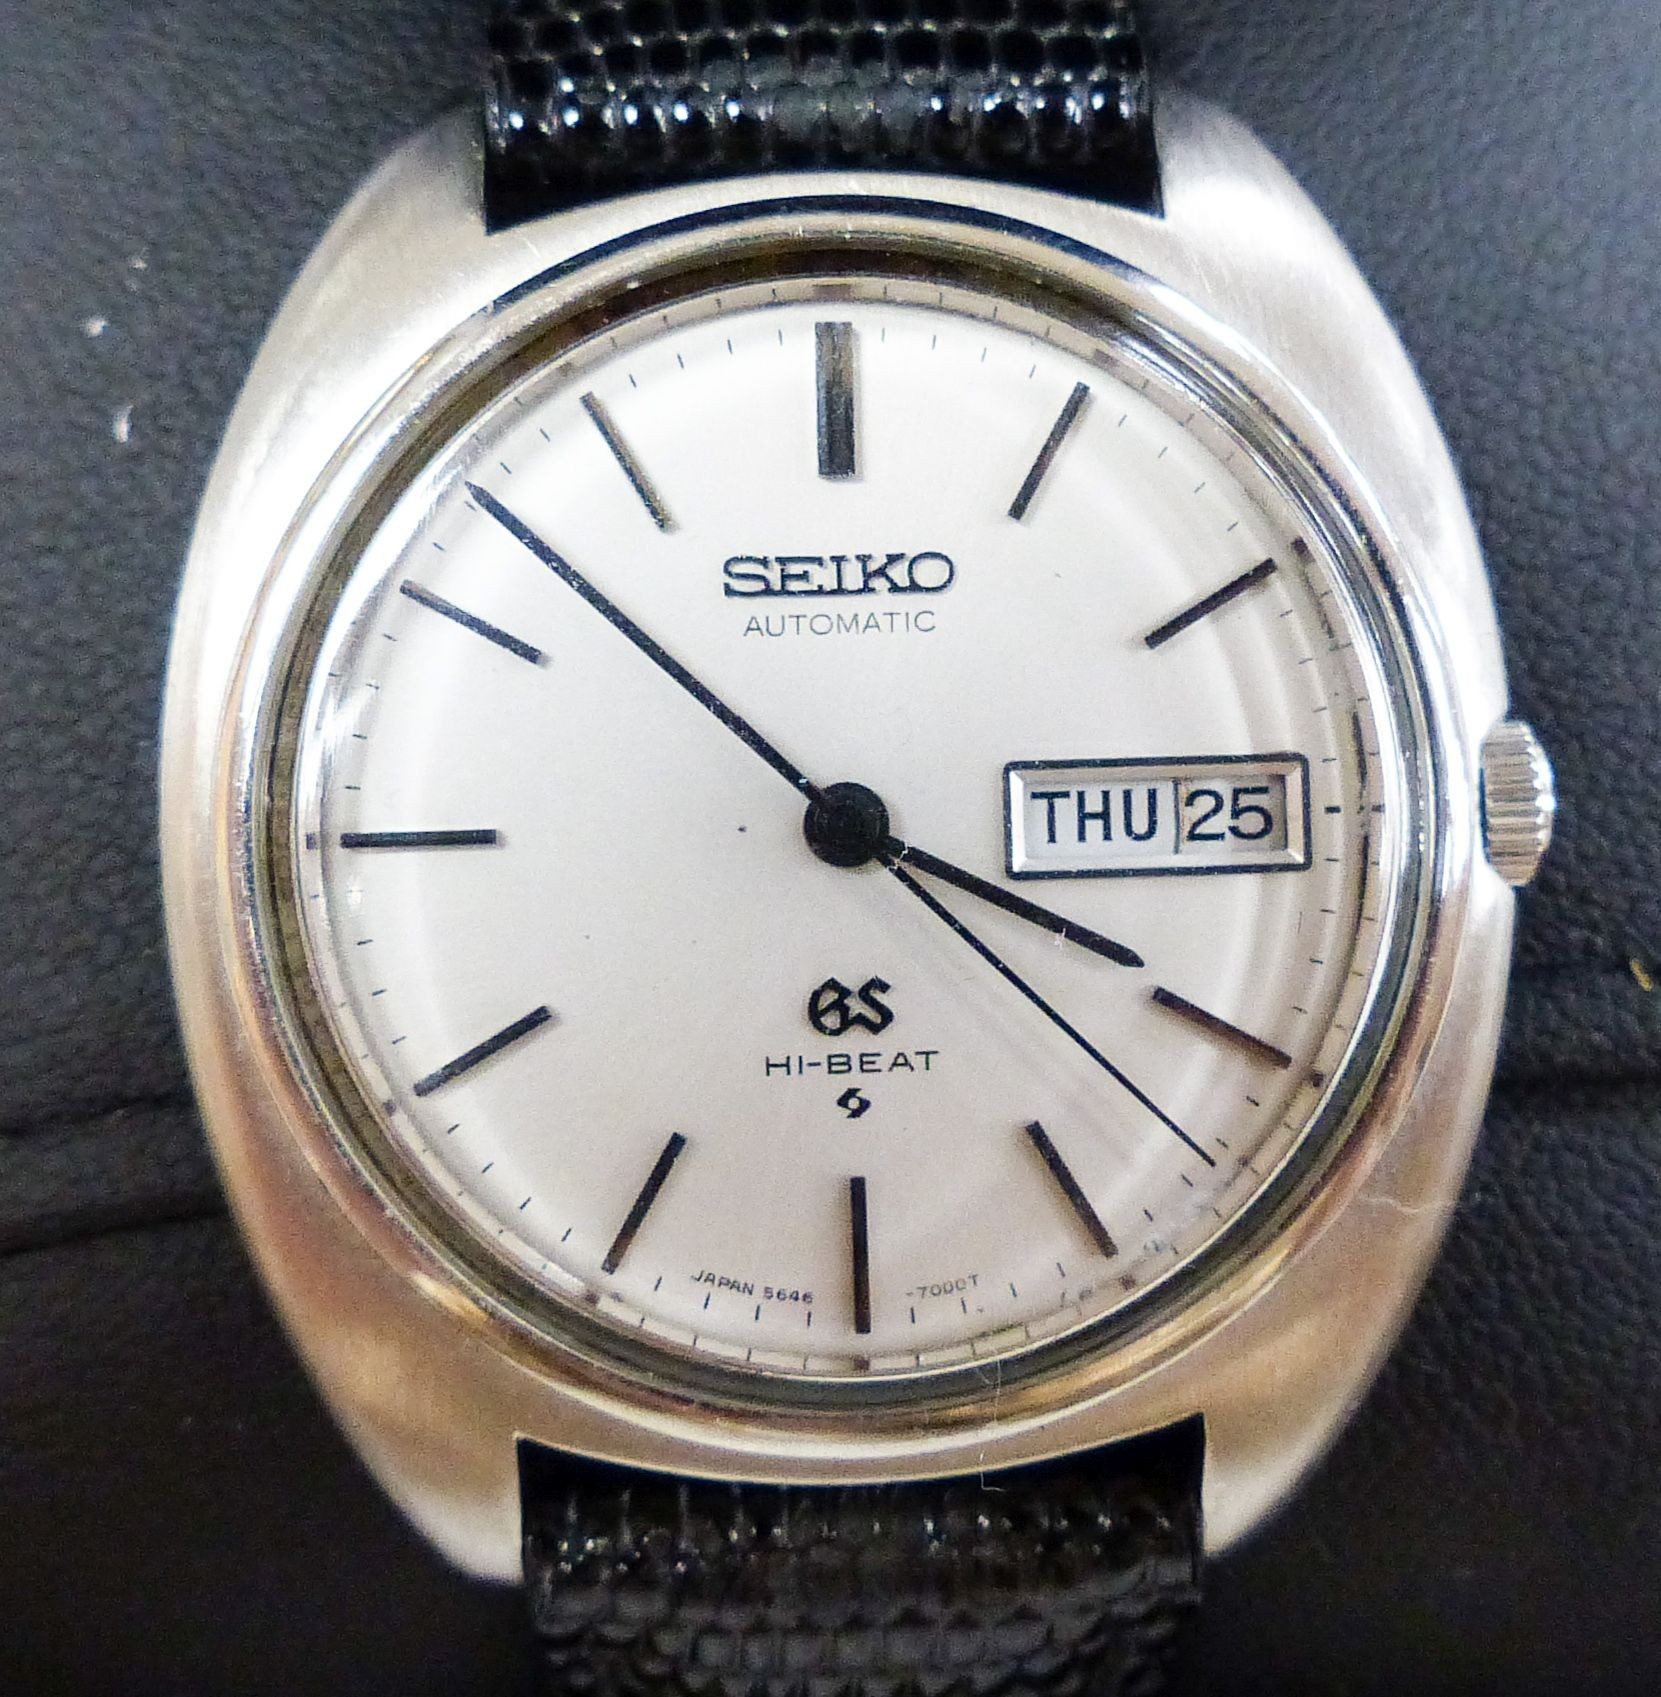 A gentleman's 1970's stainless steel Grand Seiko Hi-Beat chronometer day/date automatic wrist watch, on associated strap, model 5646 7000, case diameter 36mm, with Seiko box